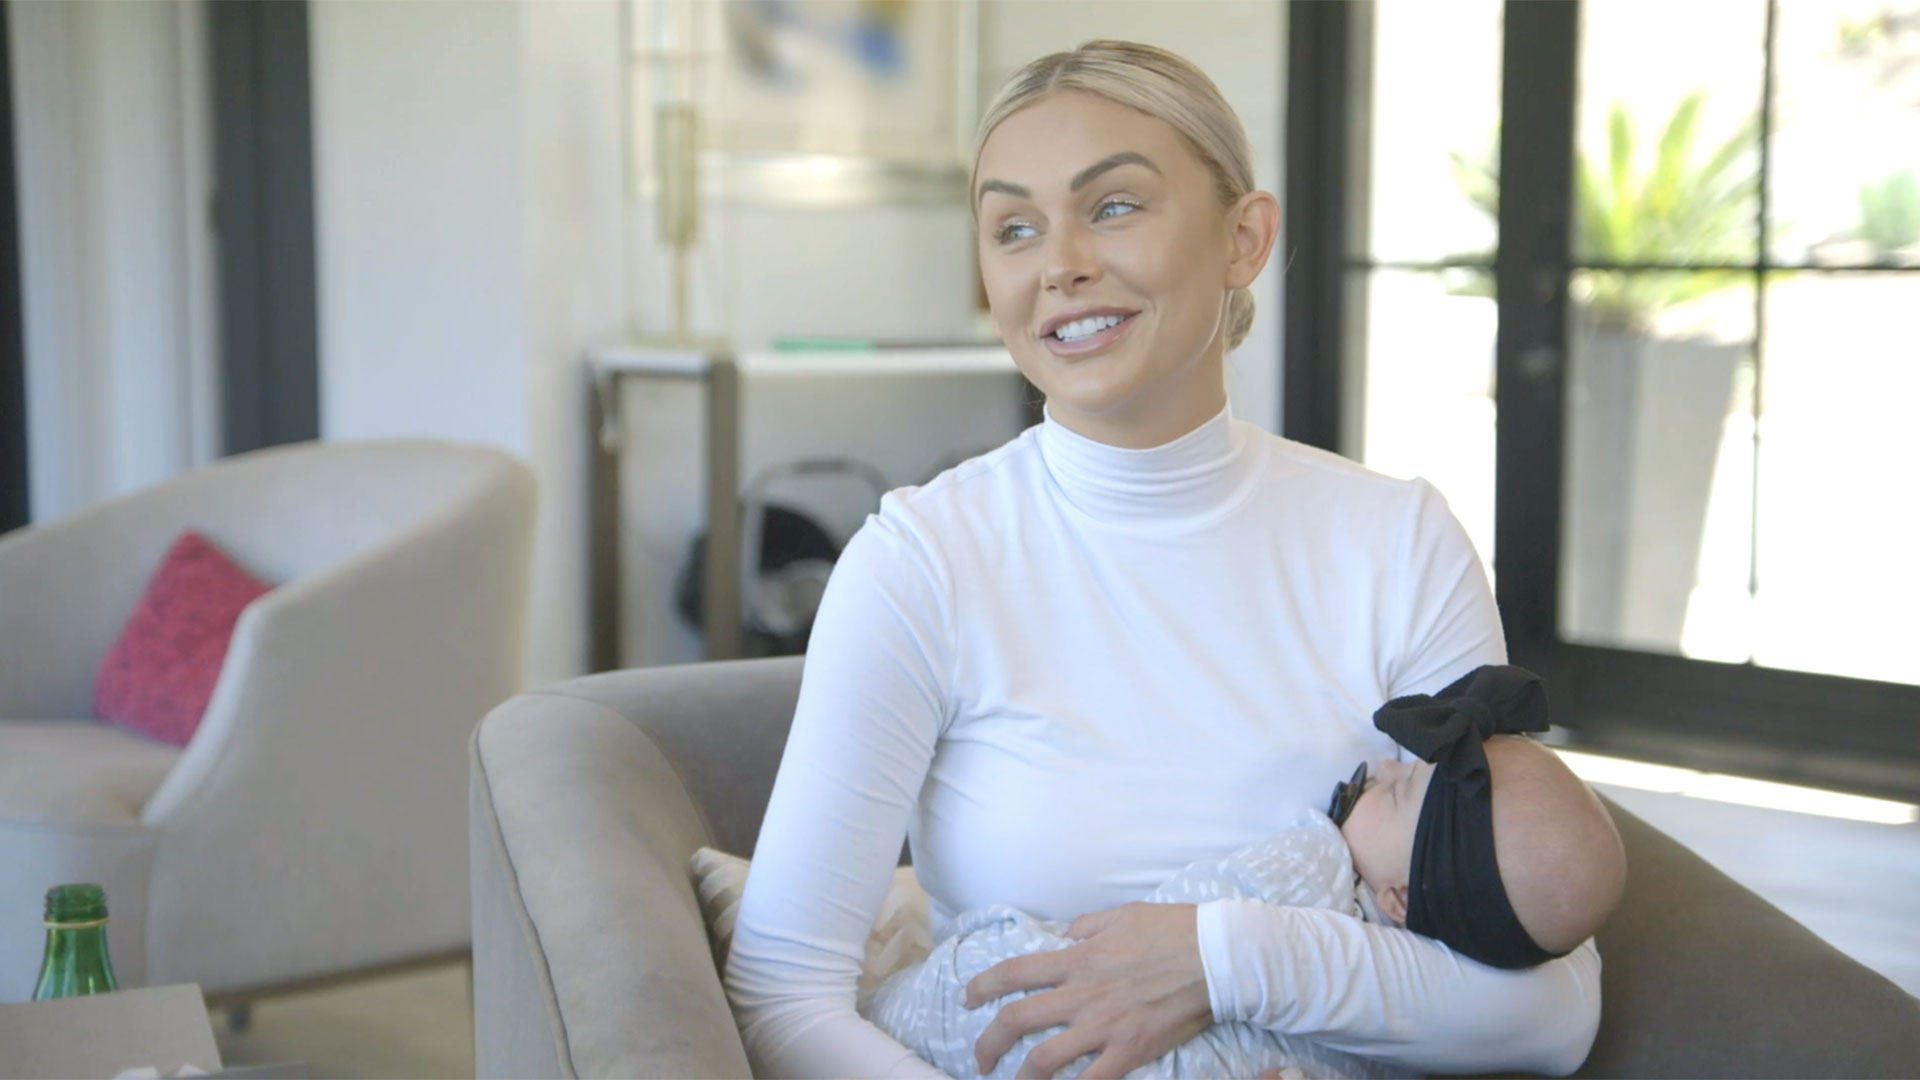 James Kennedy Gives Lala Kent's Baby the Most Adorable Gift